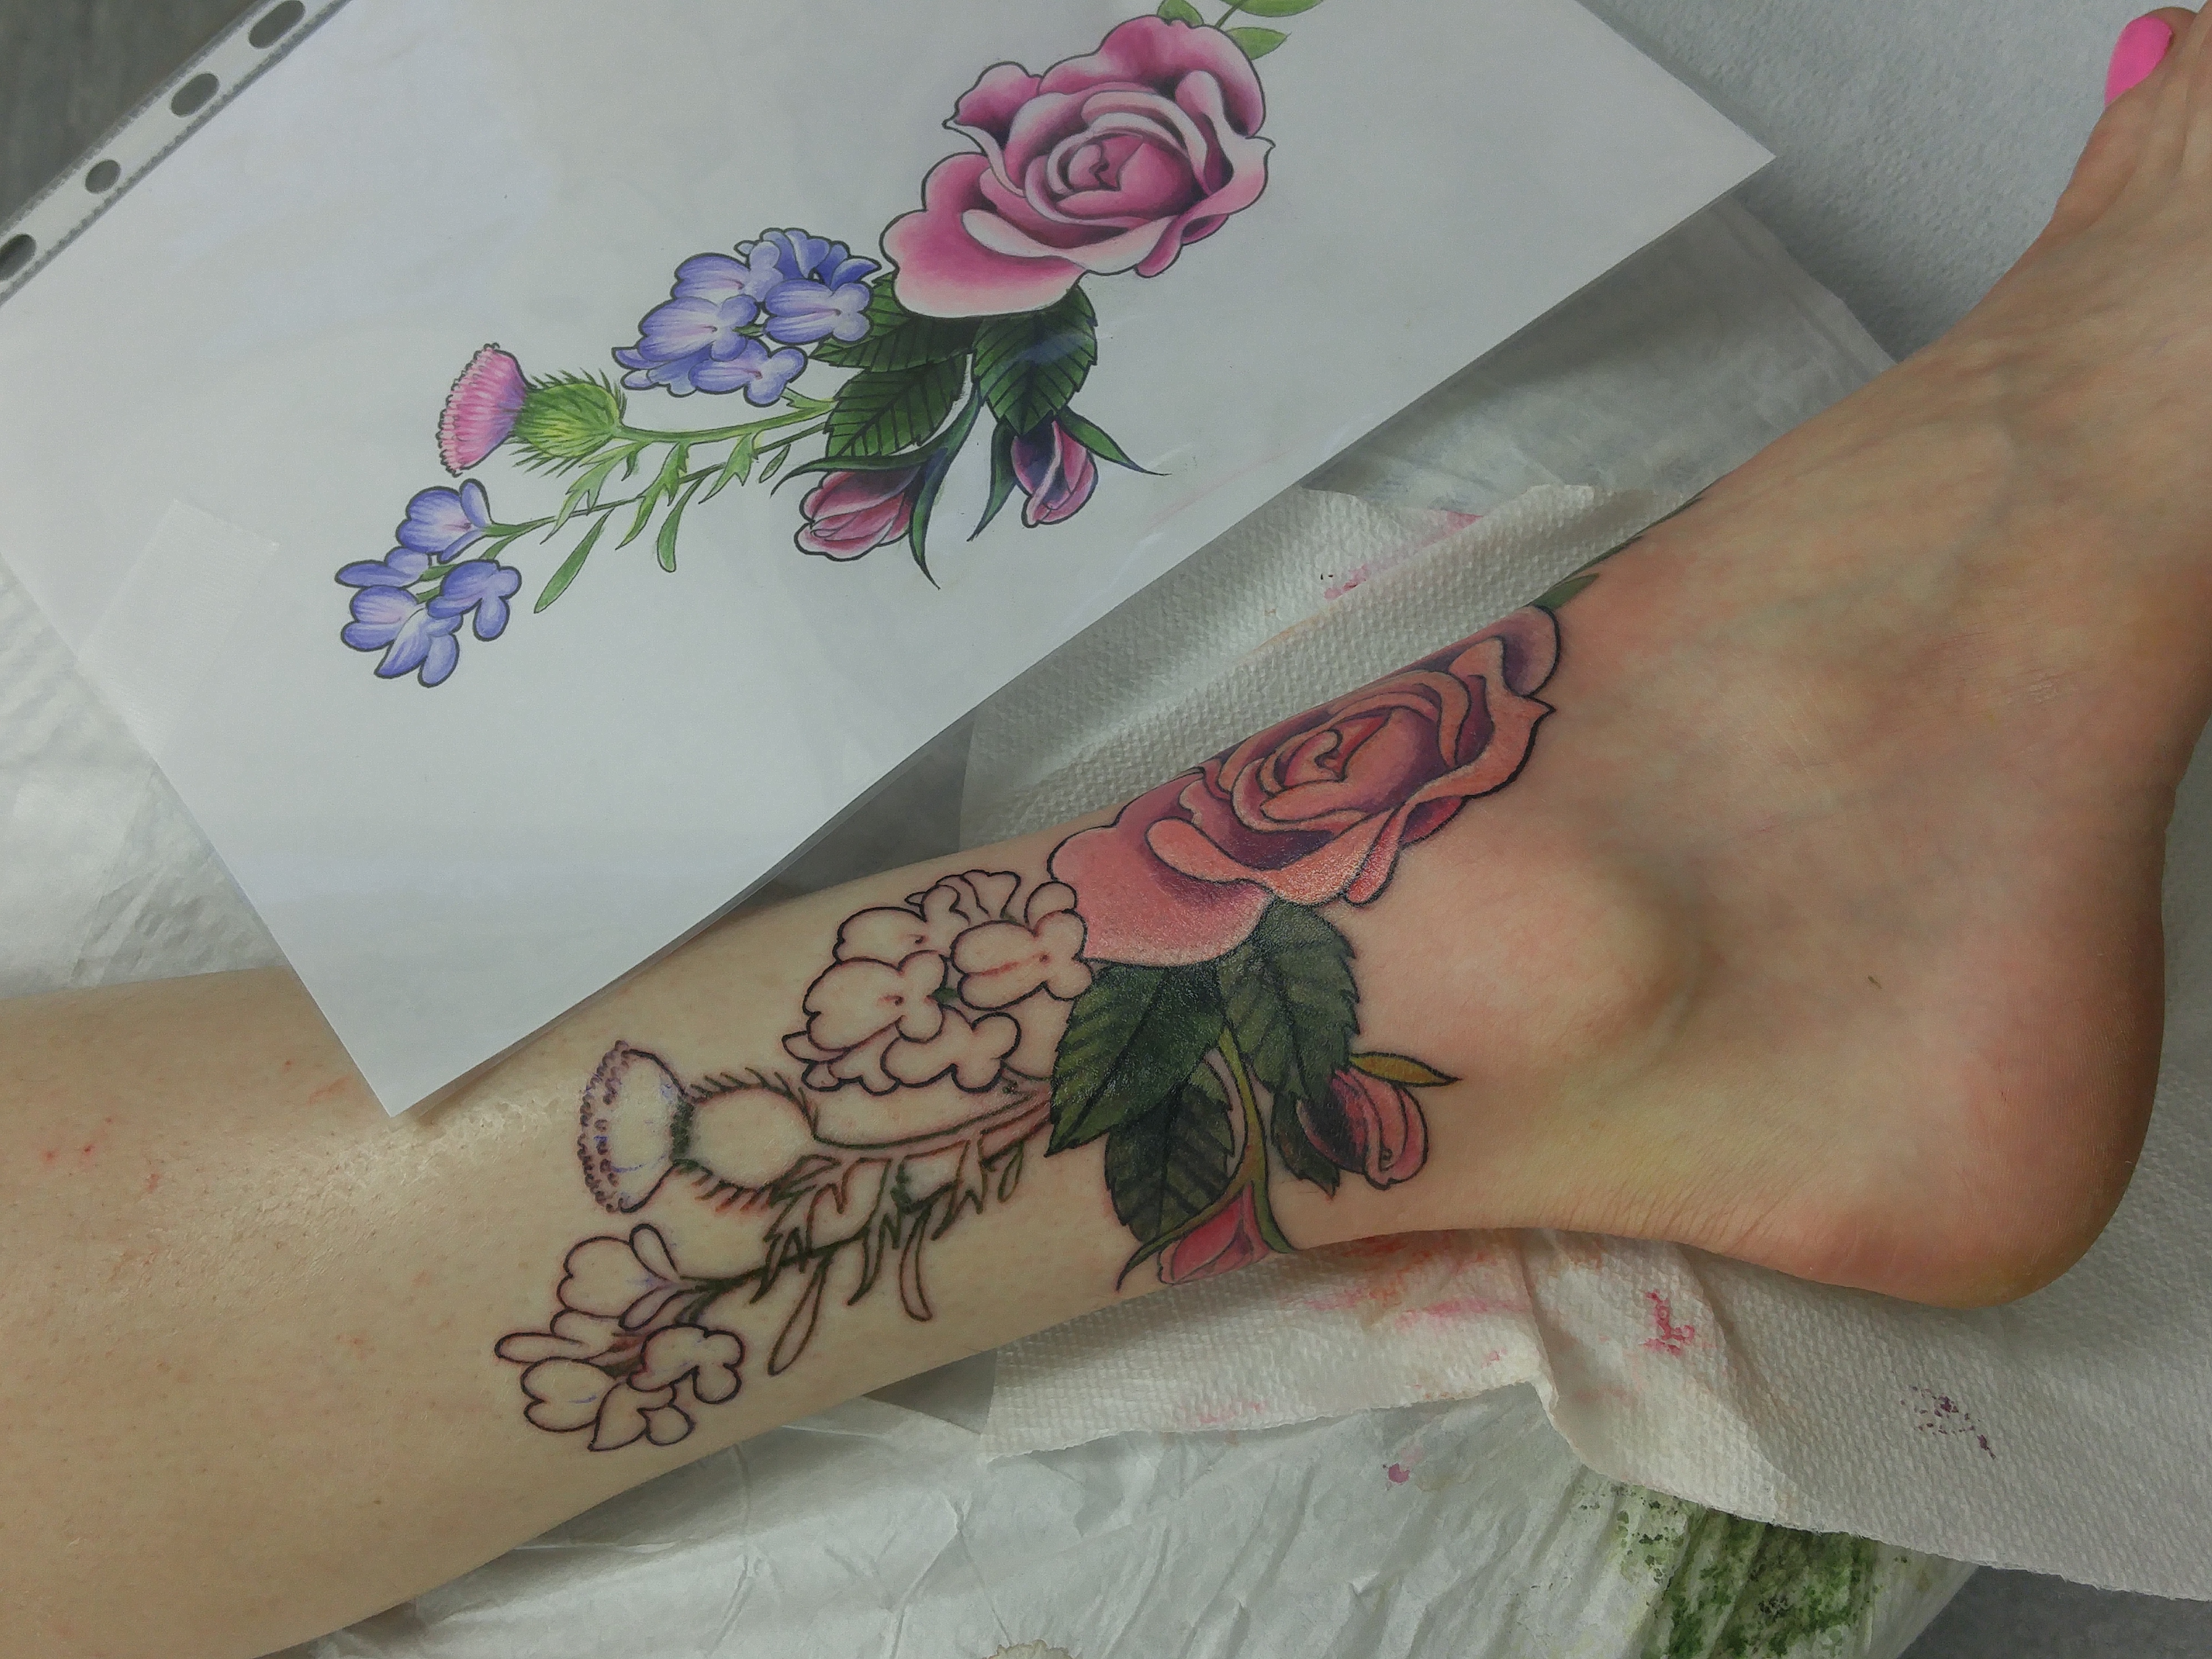 The drawing beside the partially finished tattoo